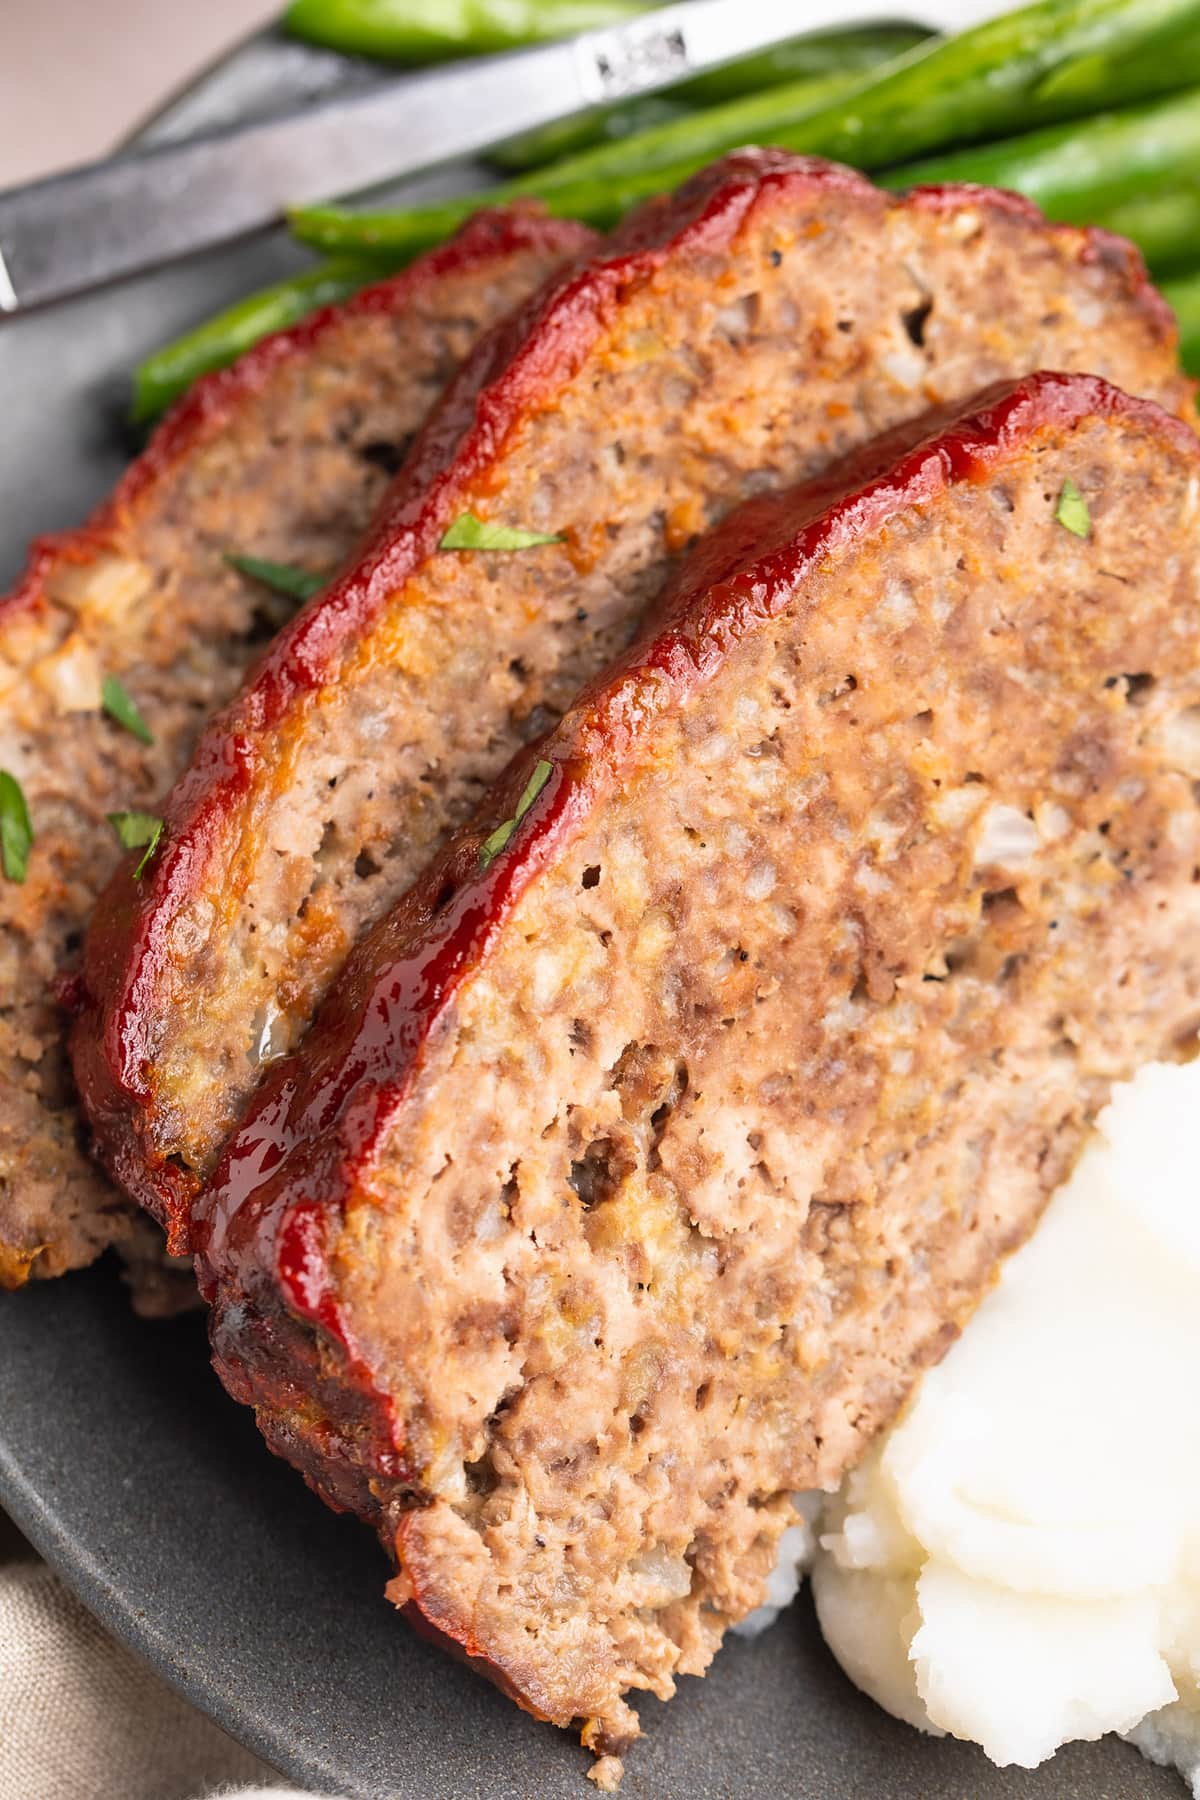 Close-up look at three slices of gluten-free meatloaf topped with red ketchup.